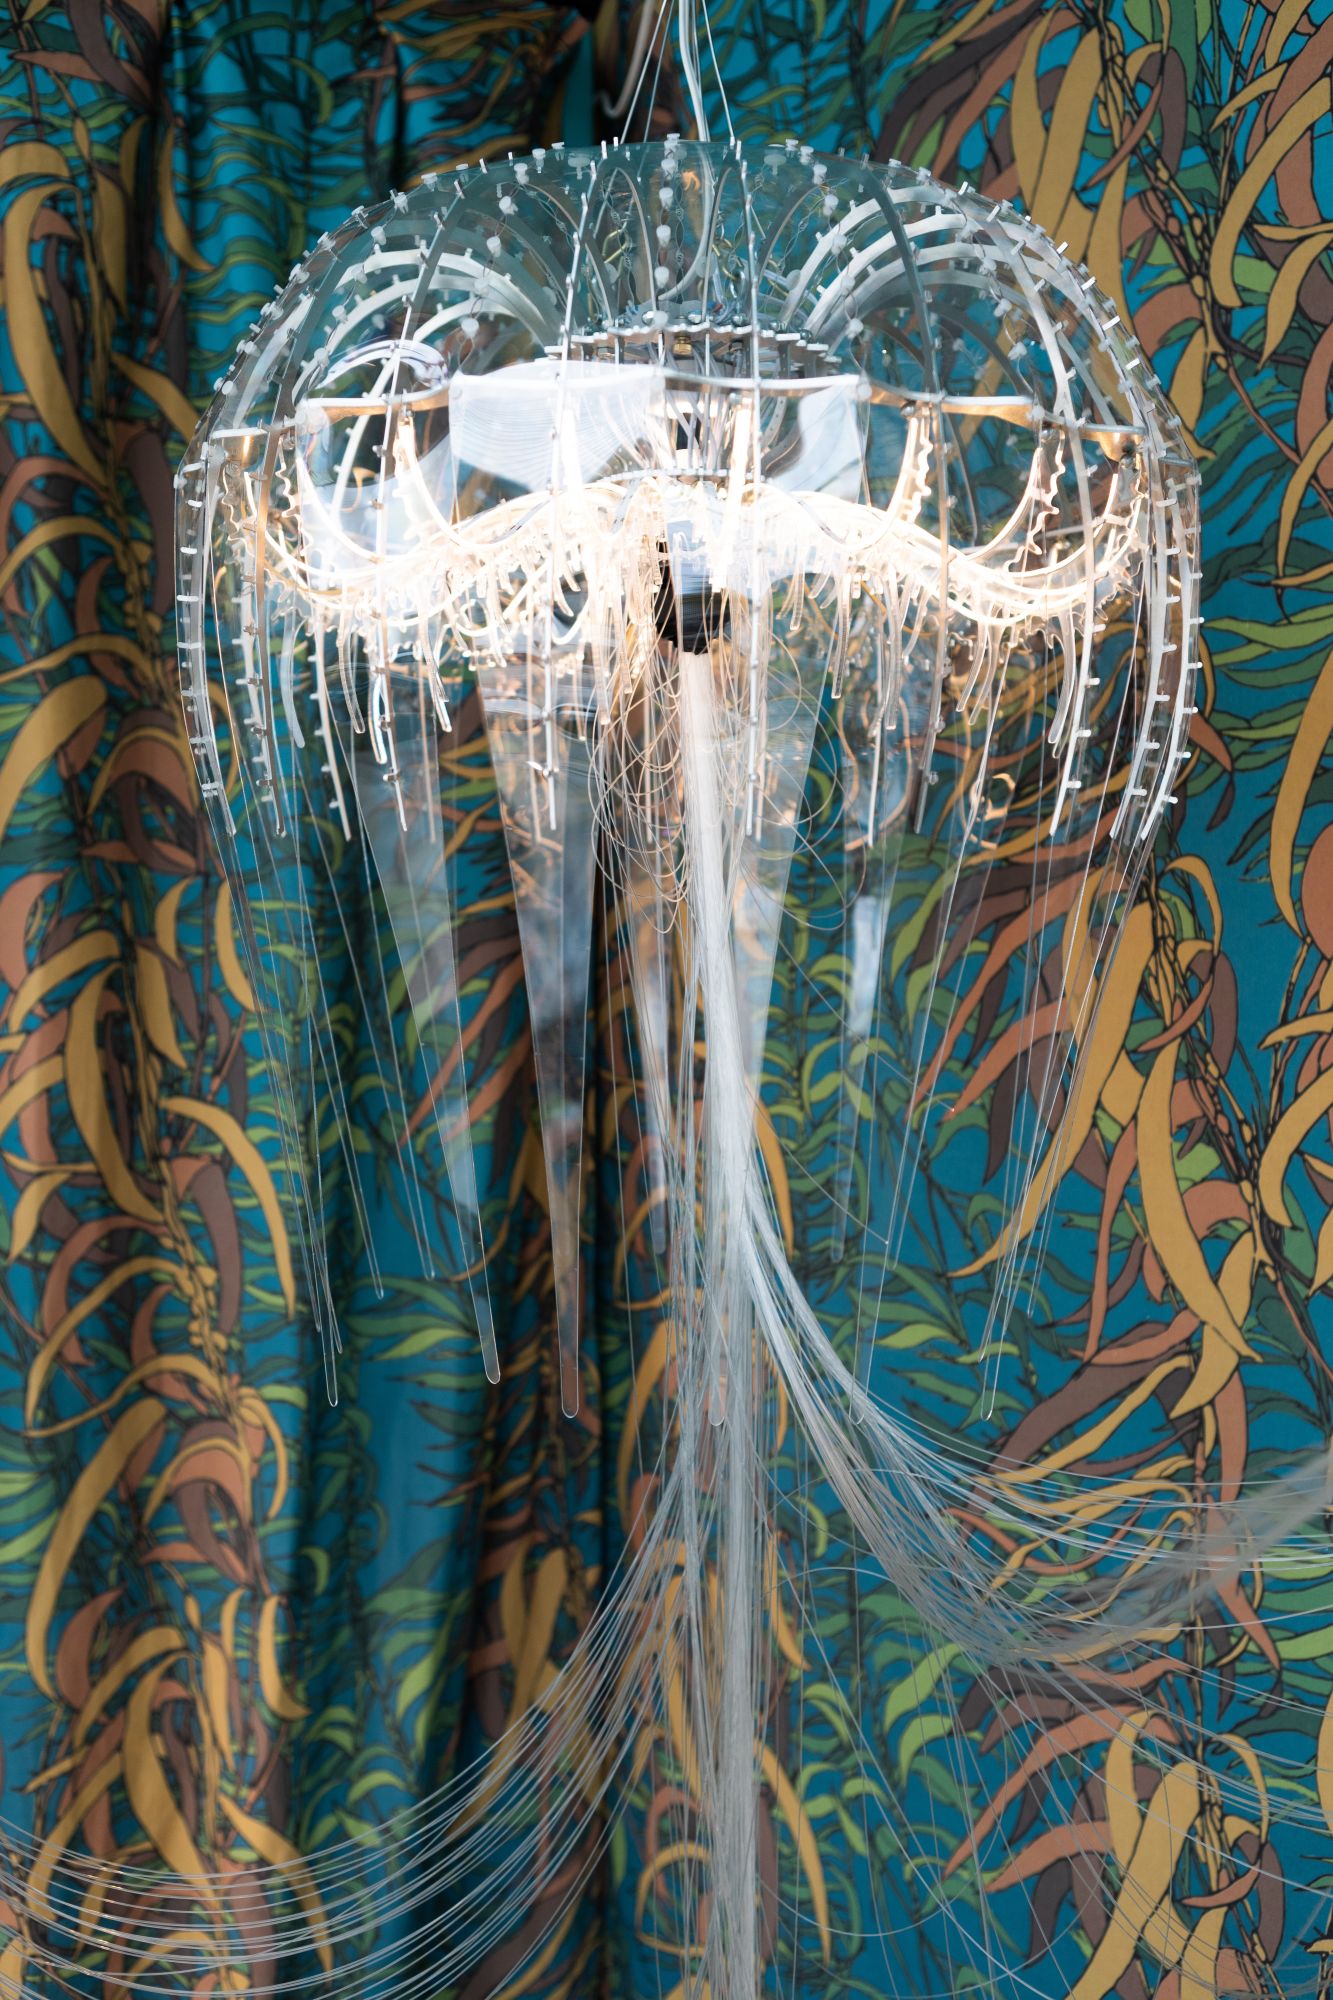 Glowing jellyfish chandelier on colorful background - photo